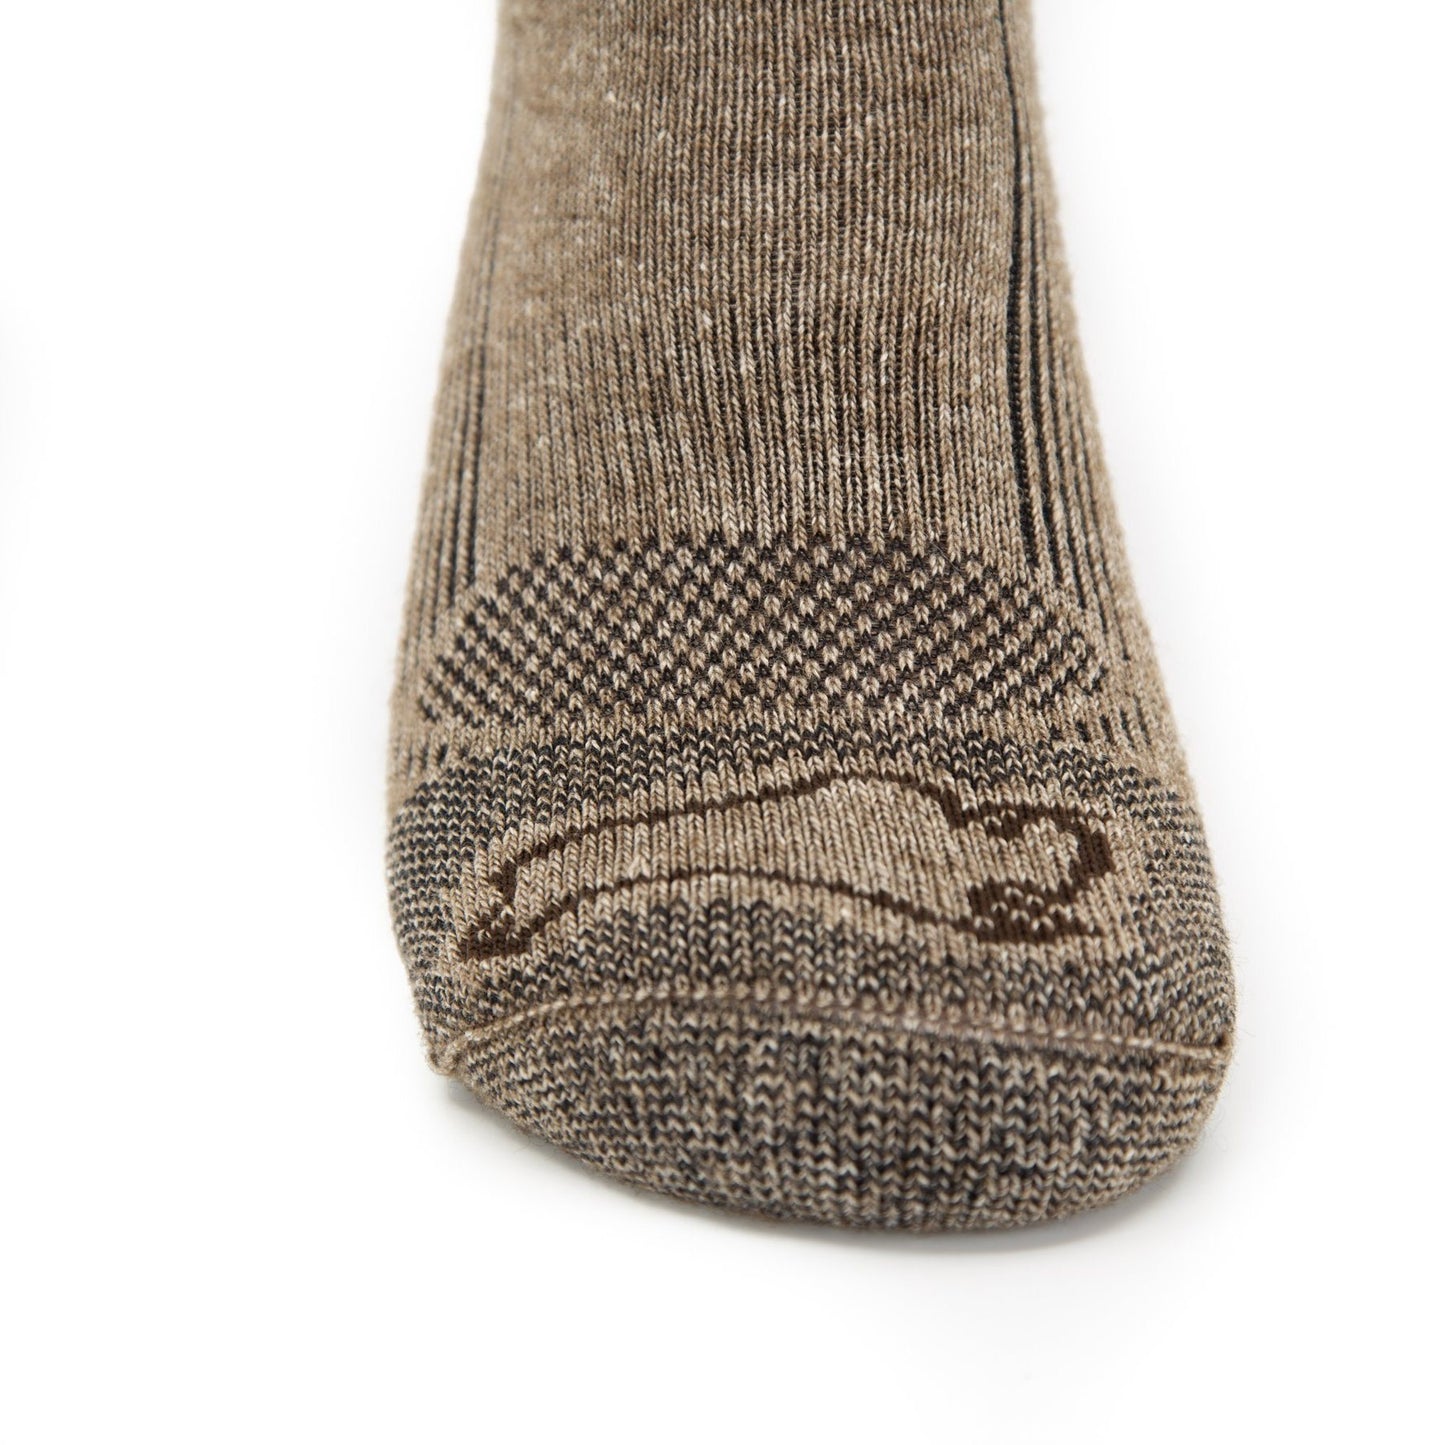 American Bison - Pro-Gear Technical Bison/Silk Boot Sock